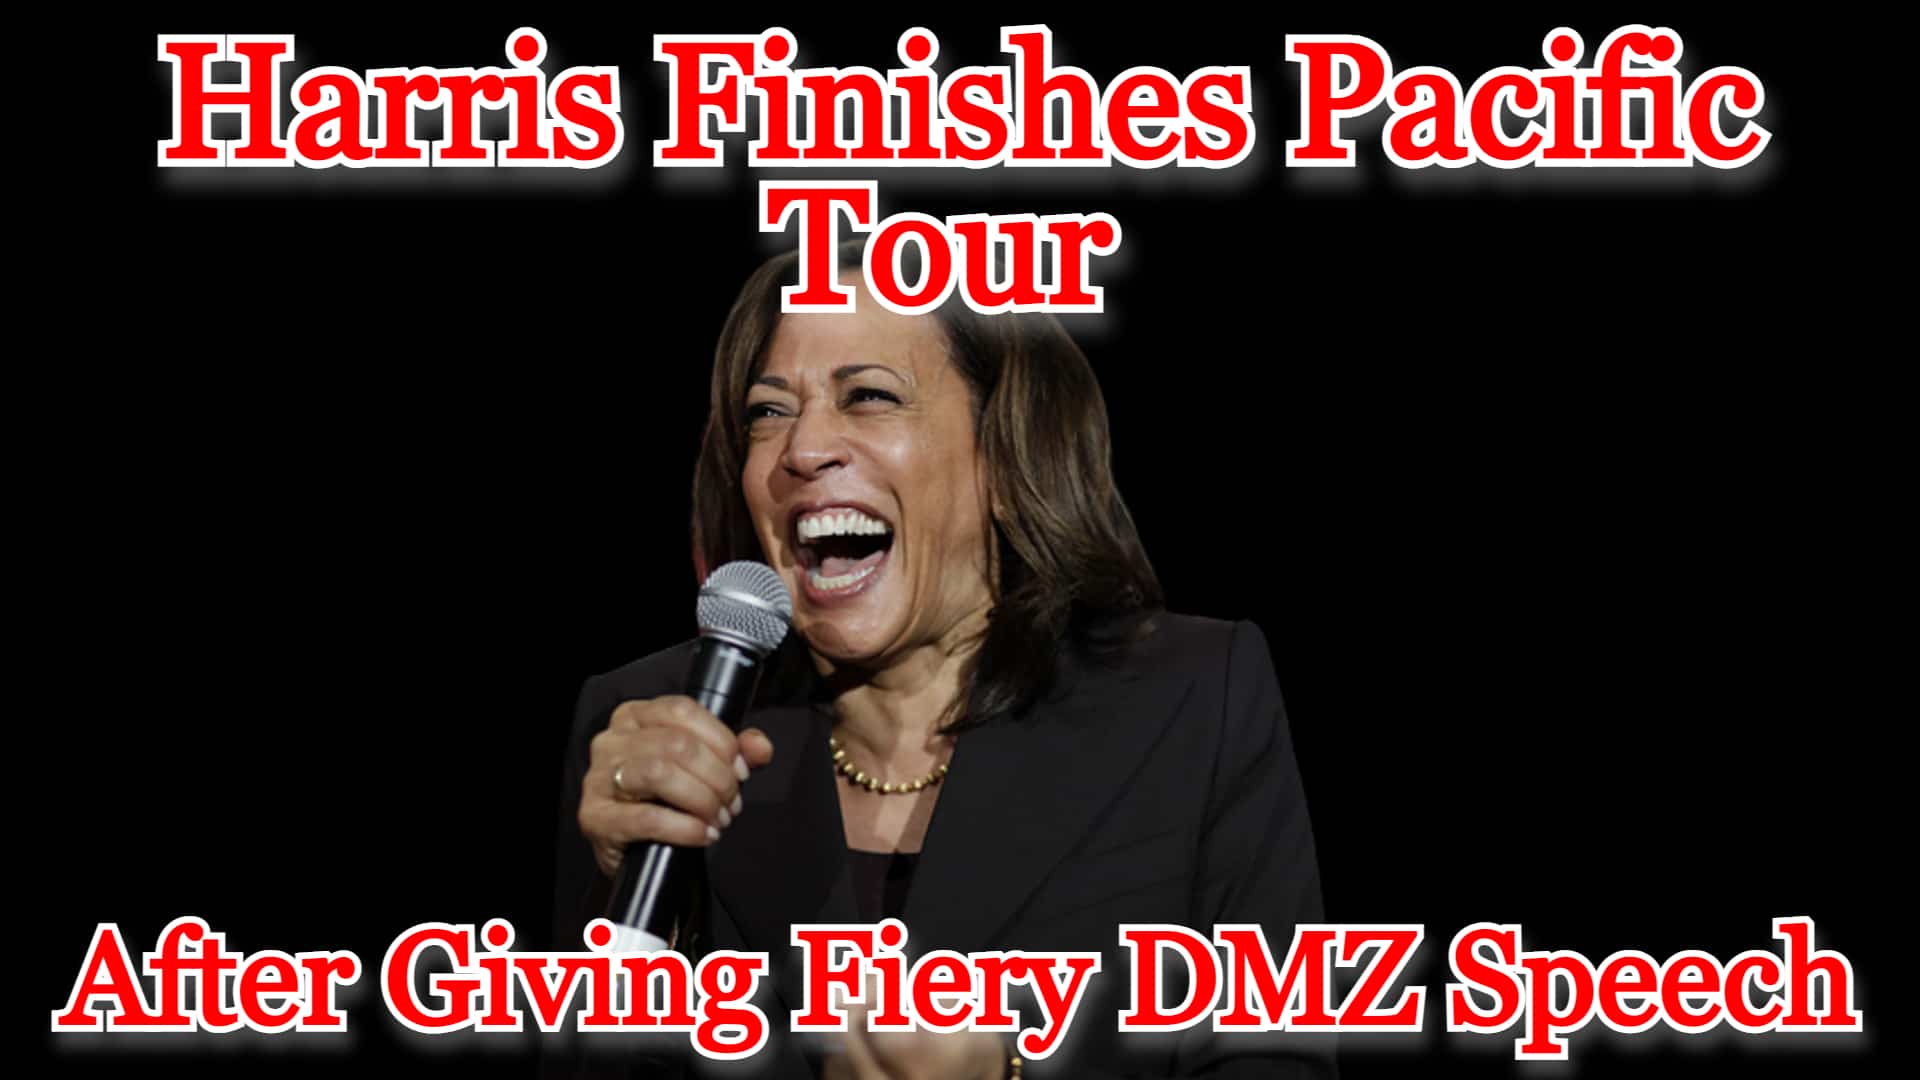 COI #332: Harris Finishes Pacific Tour After Giving Fiery DMZ Speech